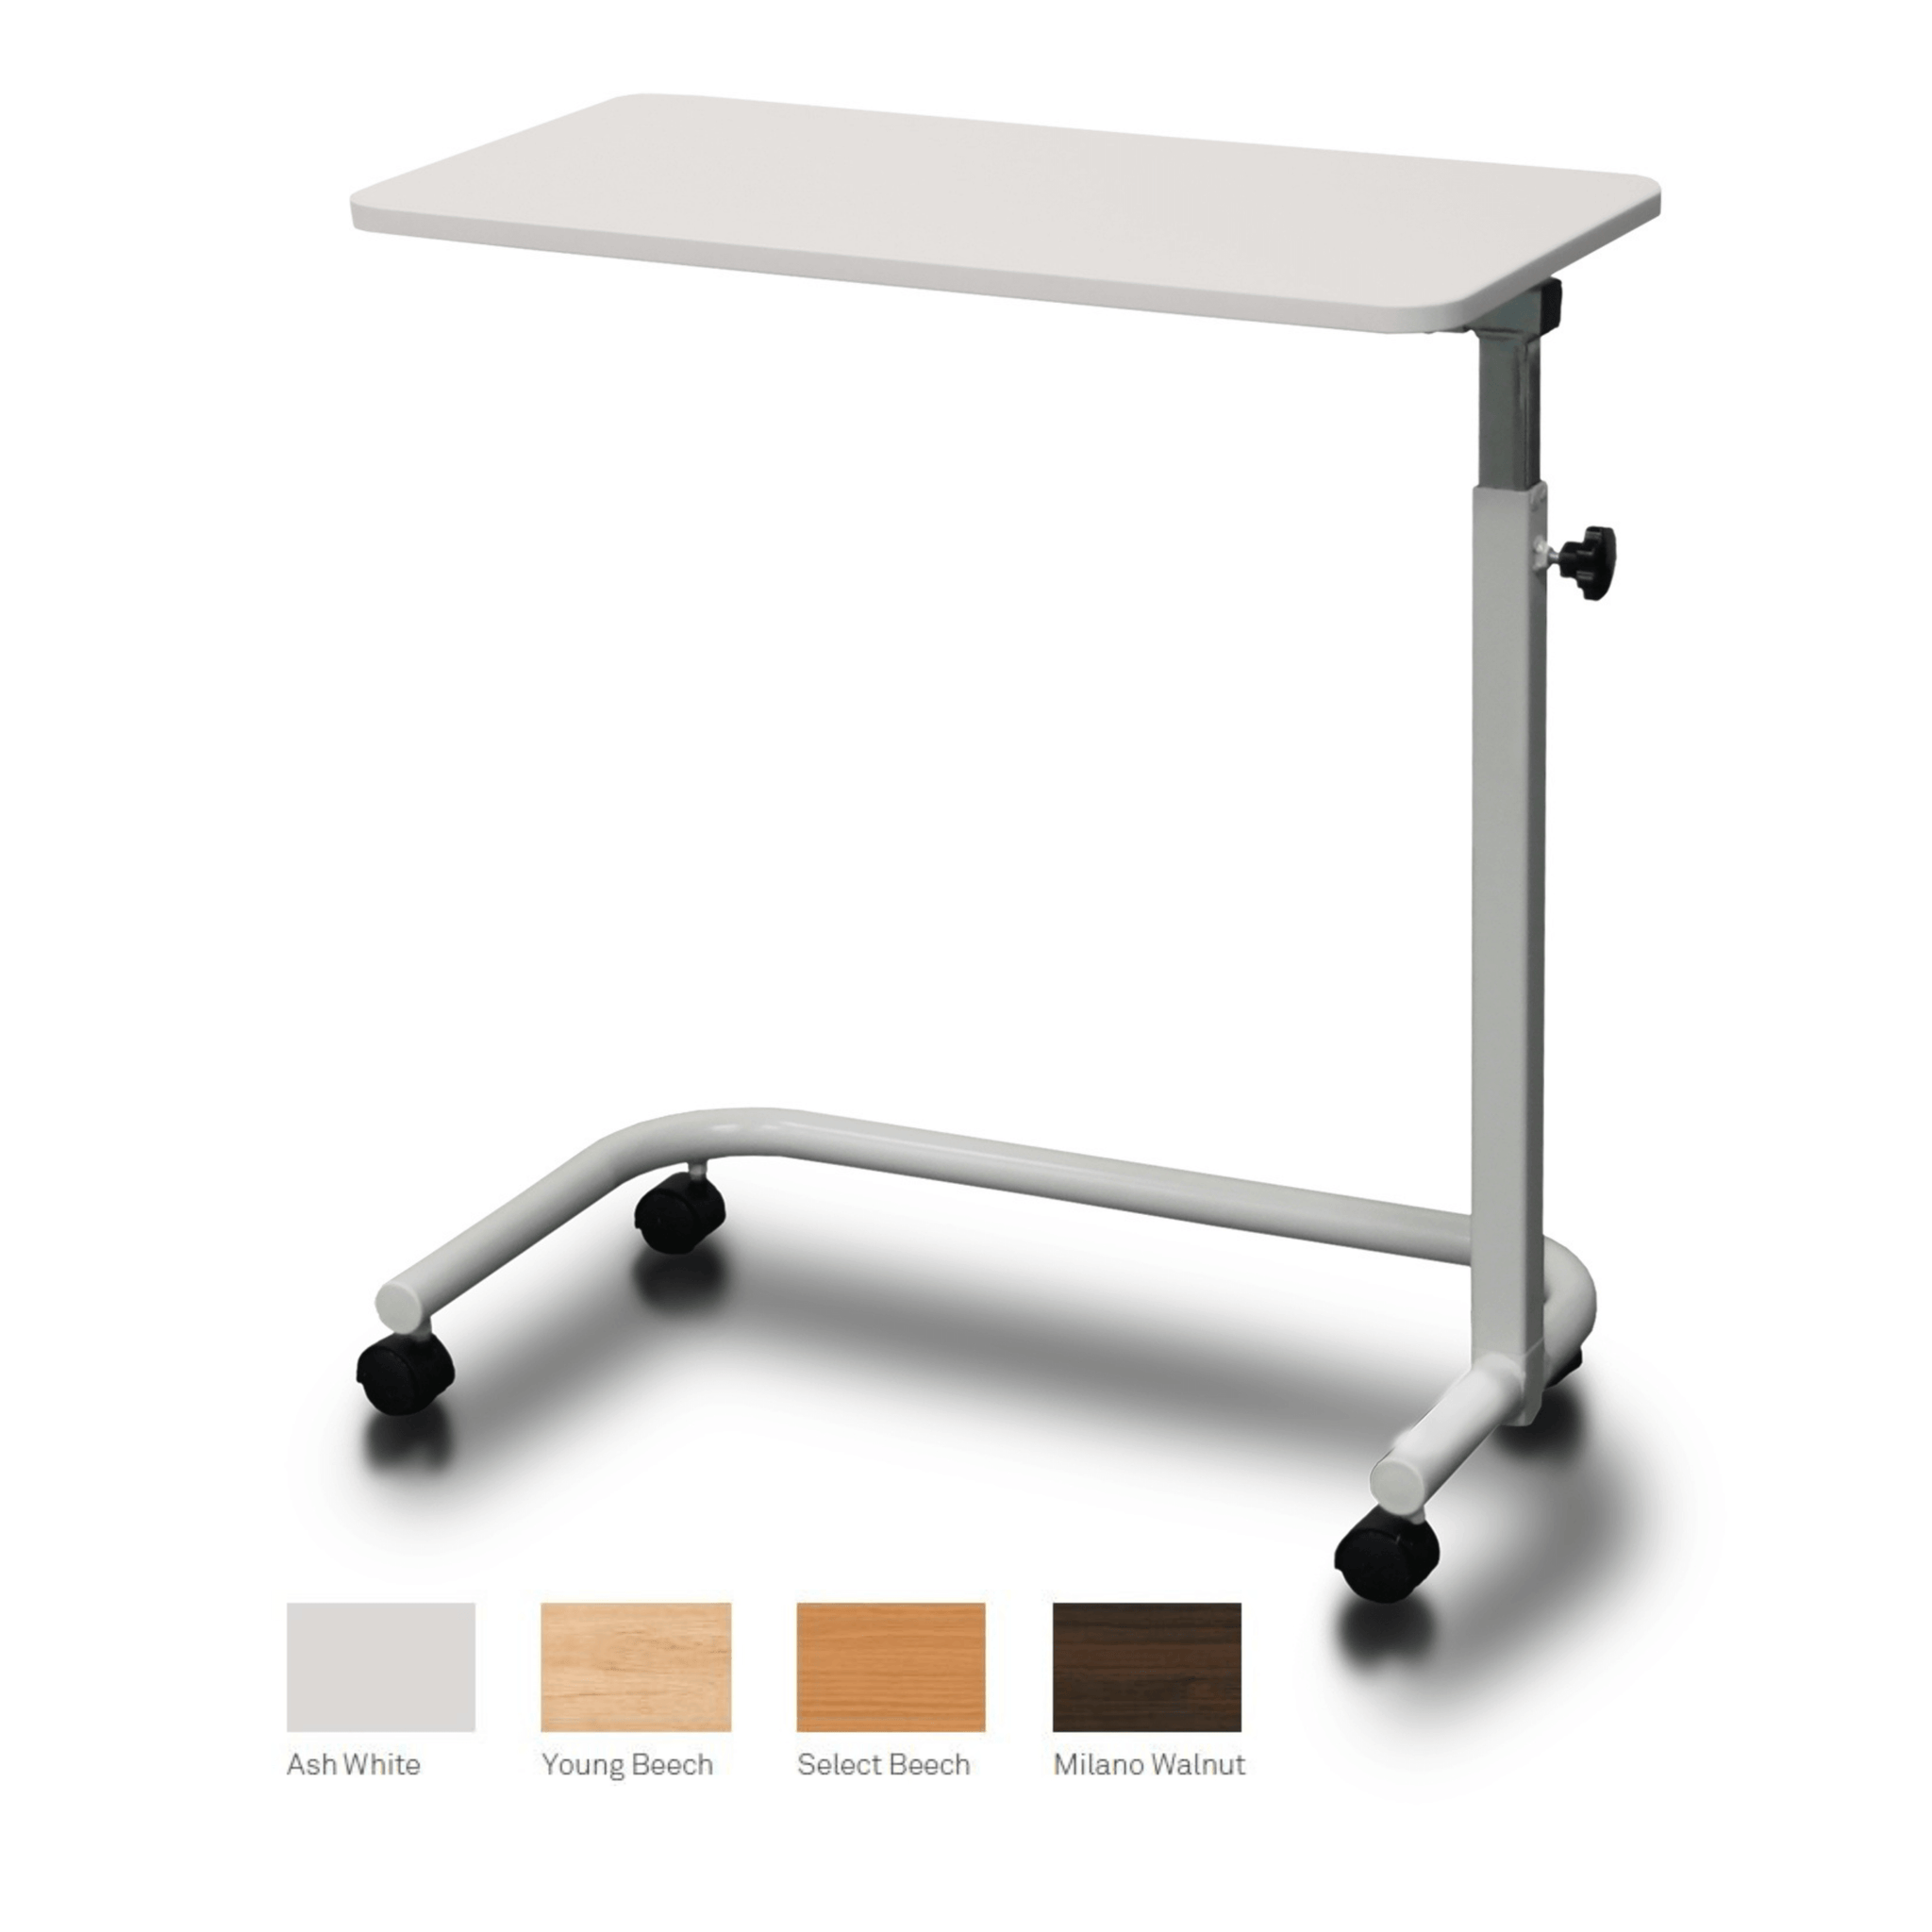 Fixed Top Overbed Table- Manual Height Adjustment, Young Beech